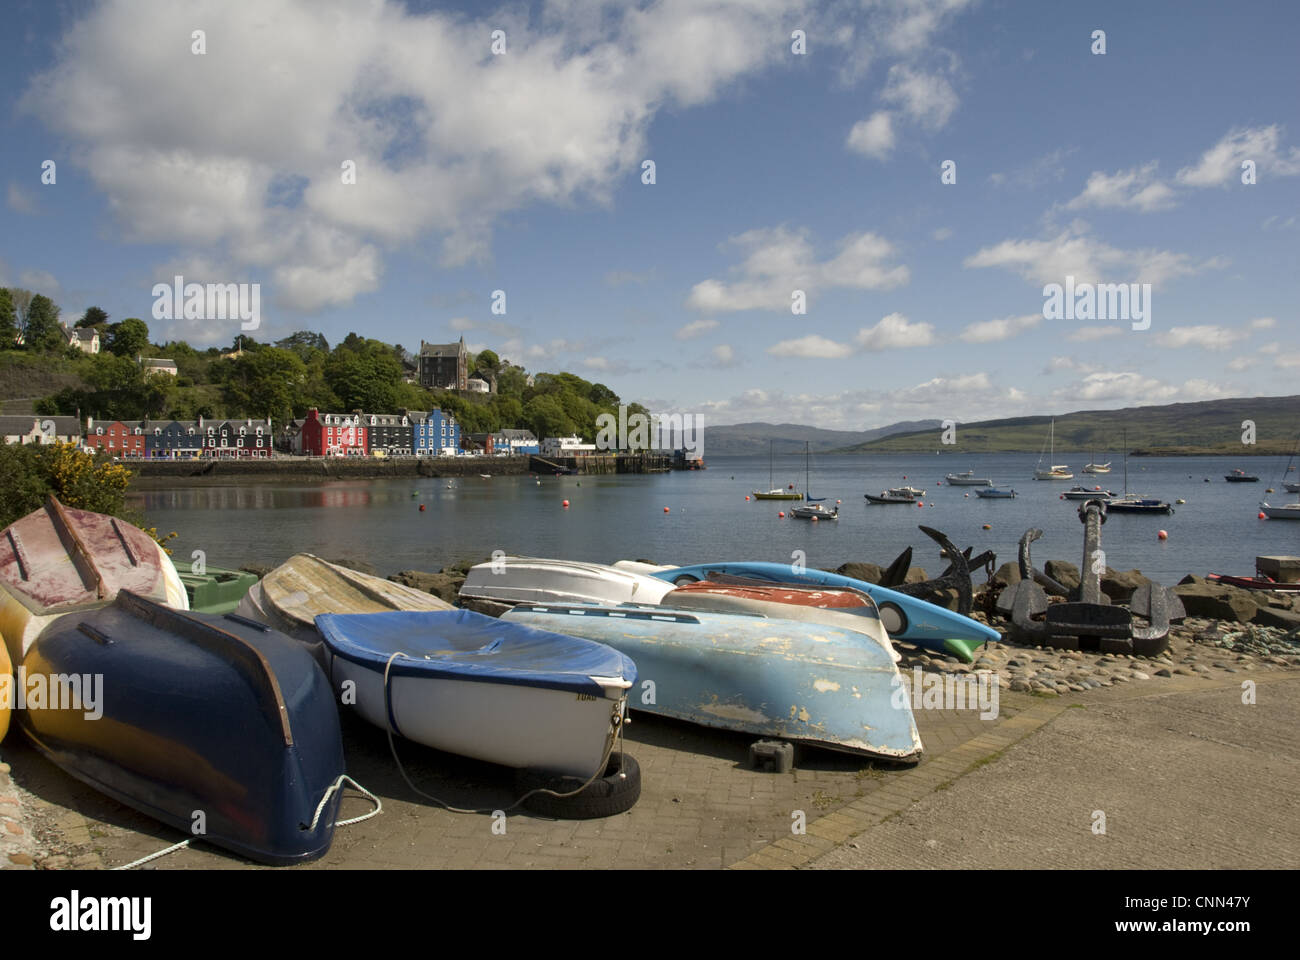 View of boats and anchors on waterfront of coastal town, Tobermory, Tobermory Bay, Isle of Mull, Inner Hebrides, Scotland, may Stock Photo